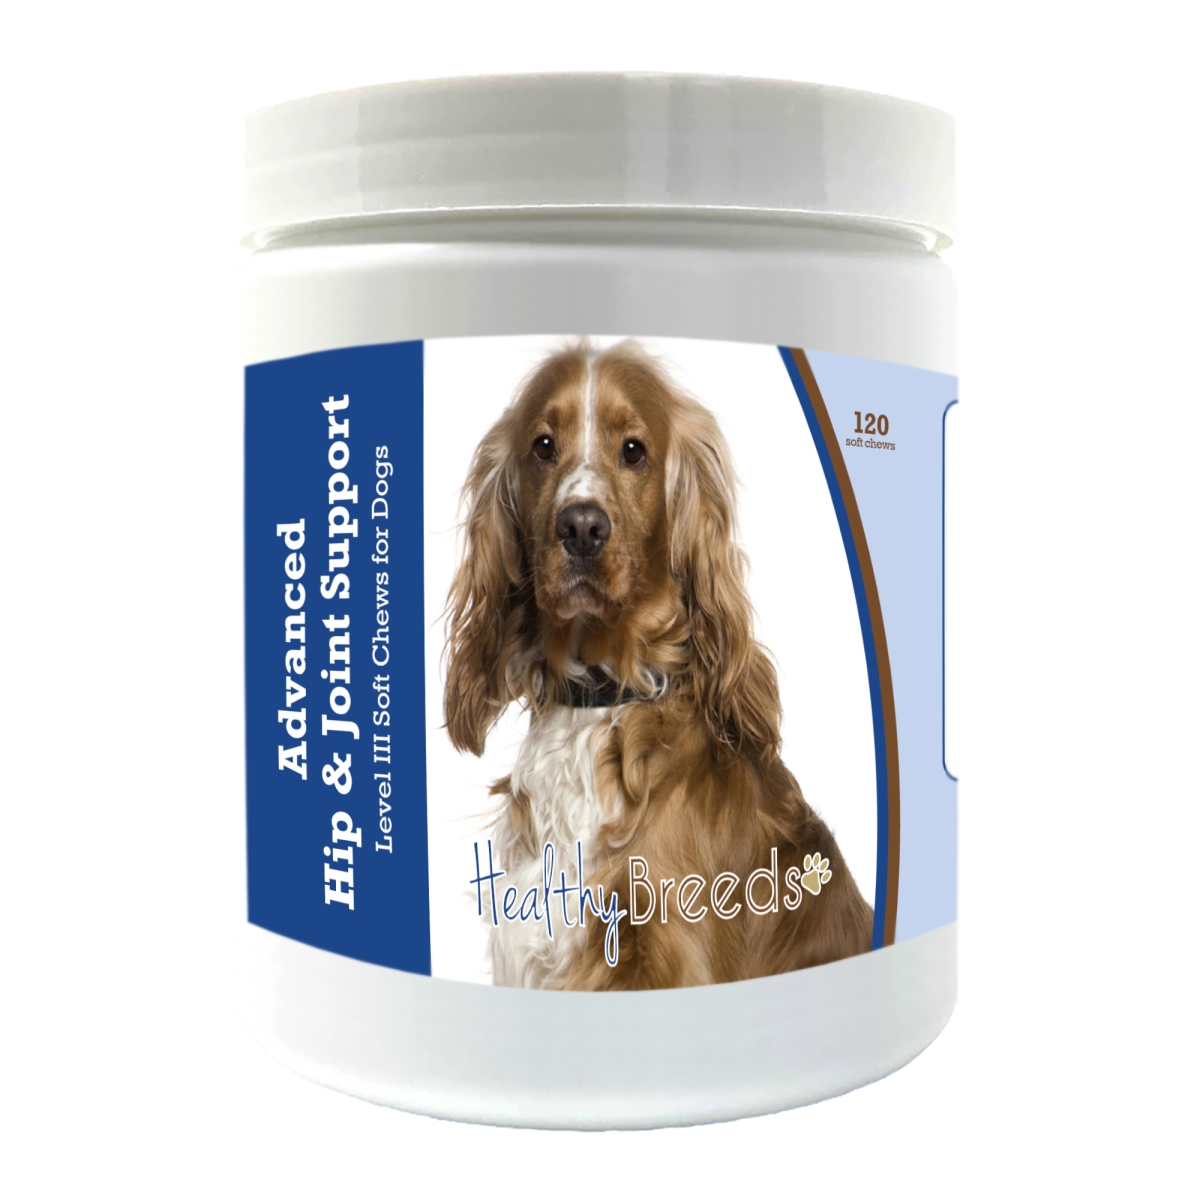 Picture of Healthy Breeds 192959898156 English Cocker Spaniel Advanced Hip & Joint Support Level III Soft Chews for Dogs